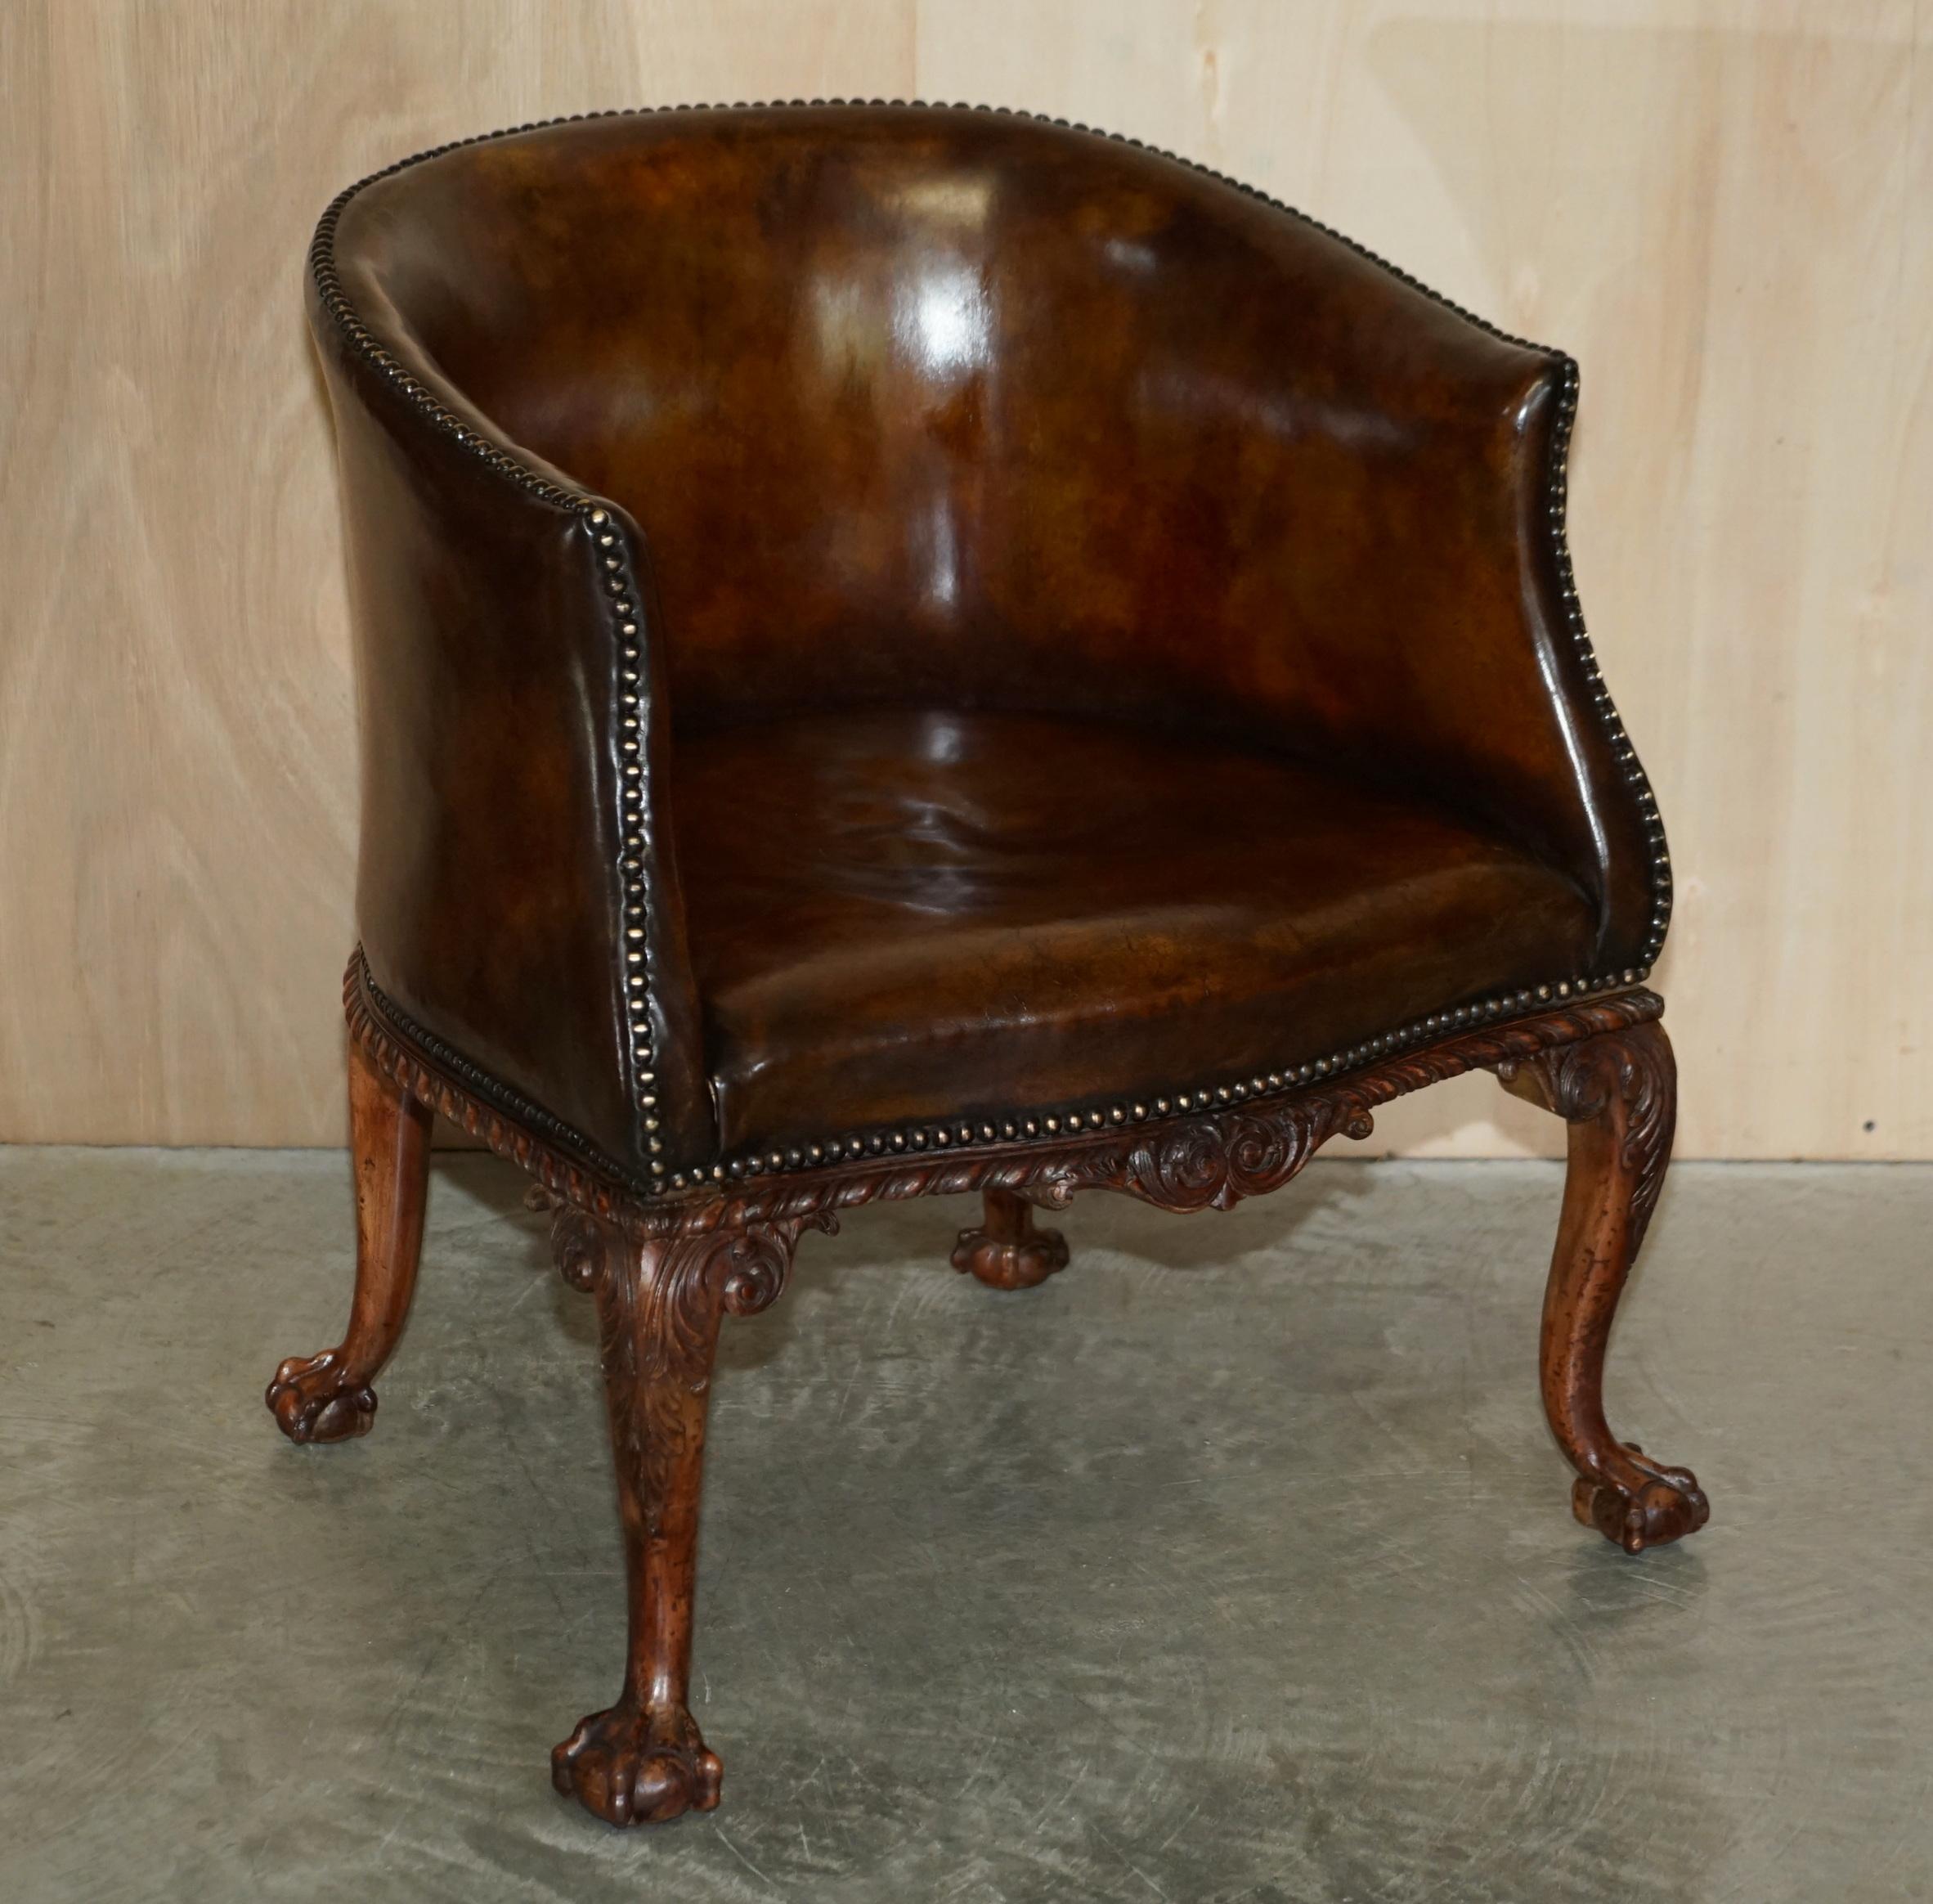 We are delighted to offer for sale this important pair of Thomas Chippendale style, heavily carved with Claw & Ball Cabriolet legs, brown leather, library tub armchairs.

These are the finest pair of library reading armchairs I have ever seen, they